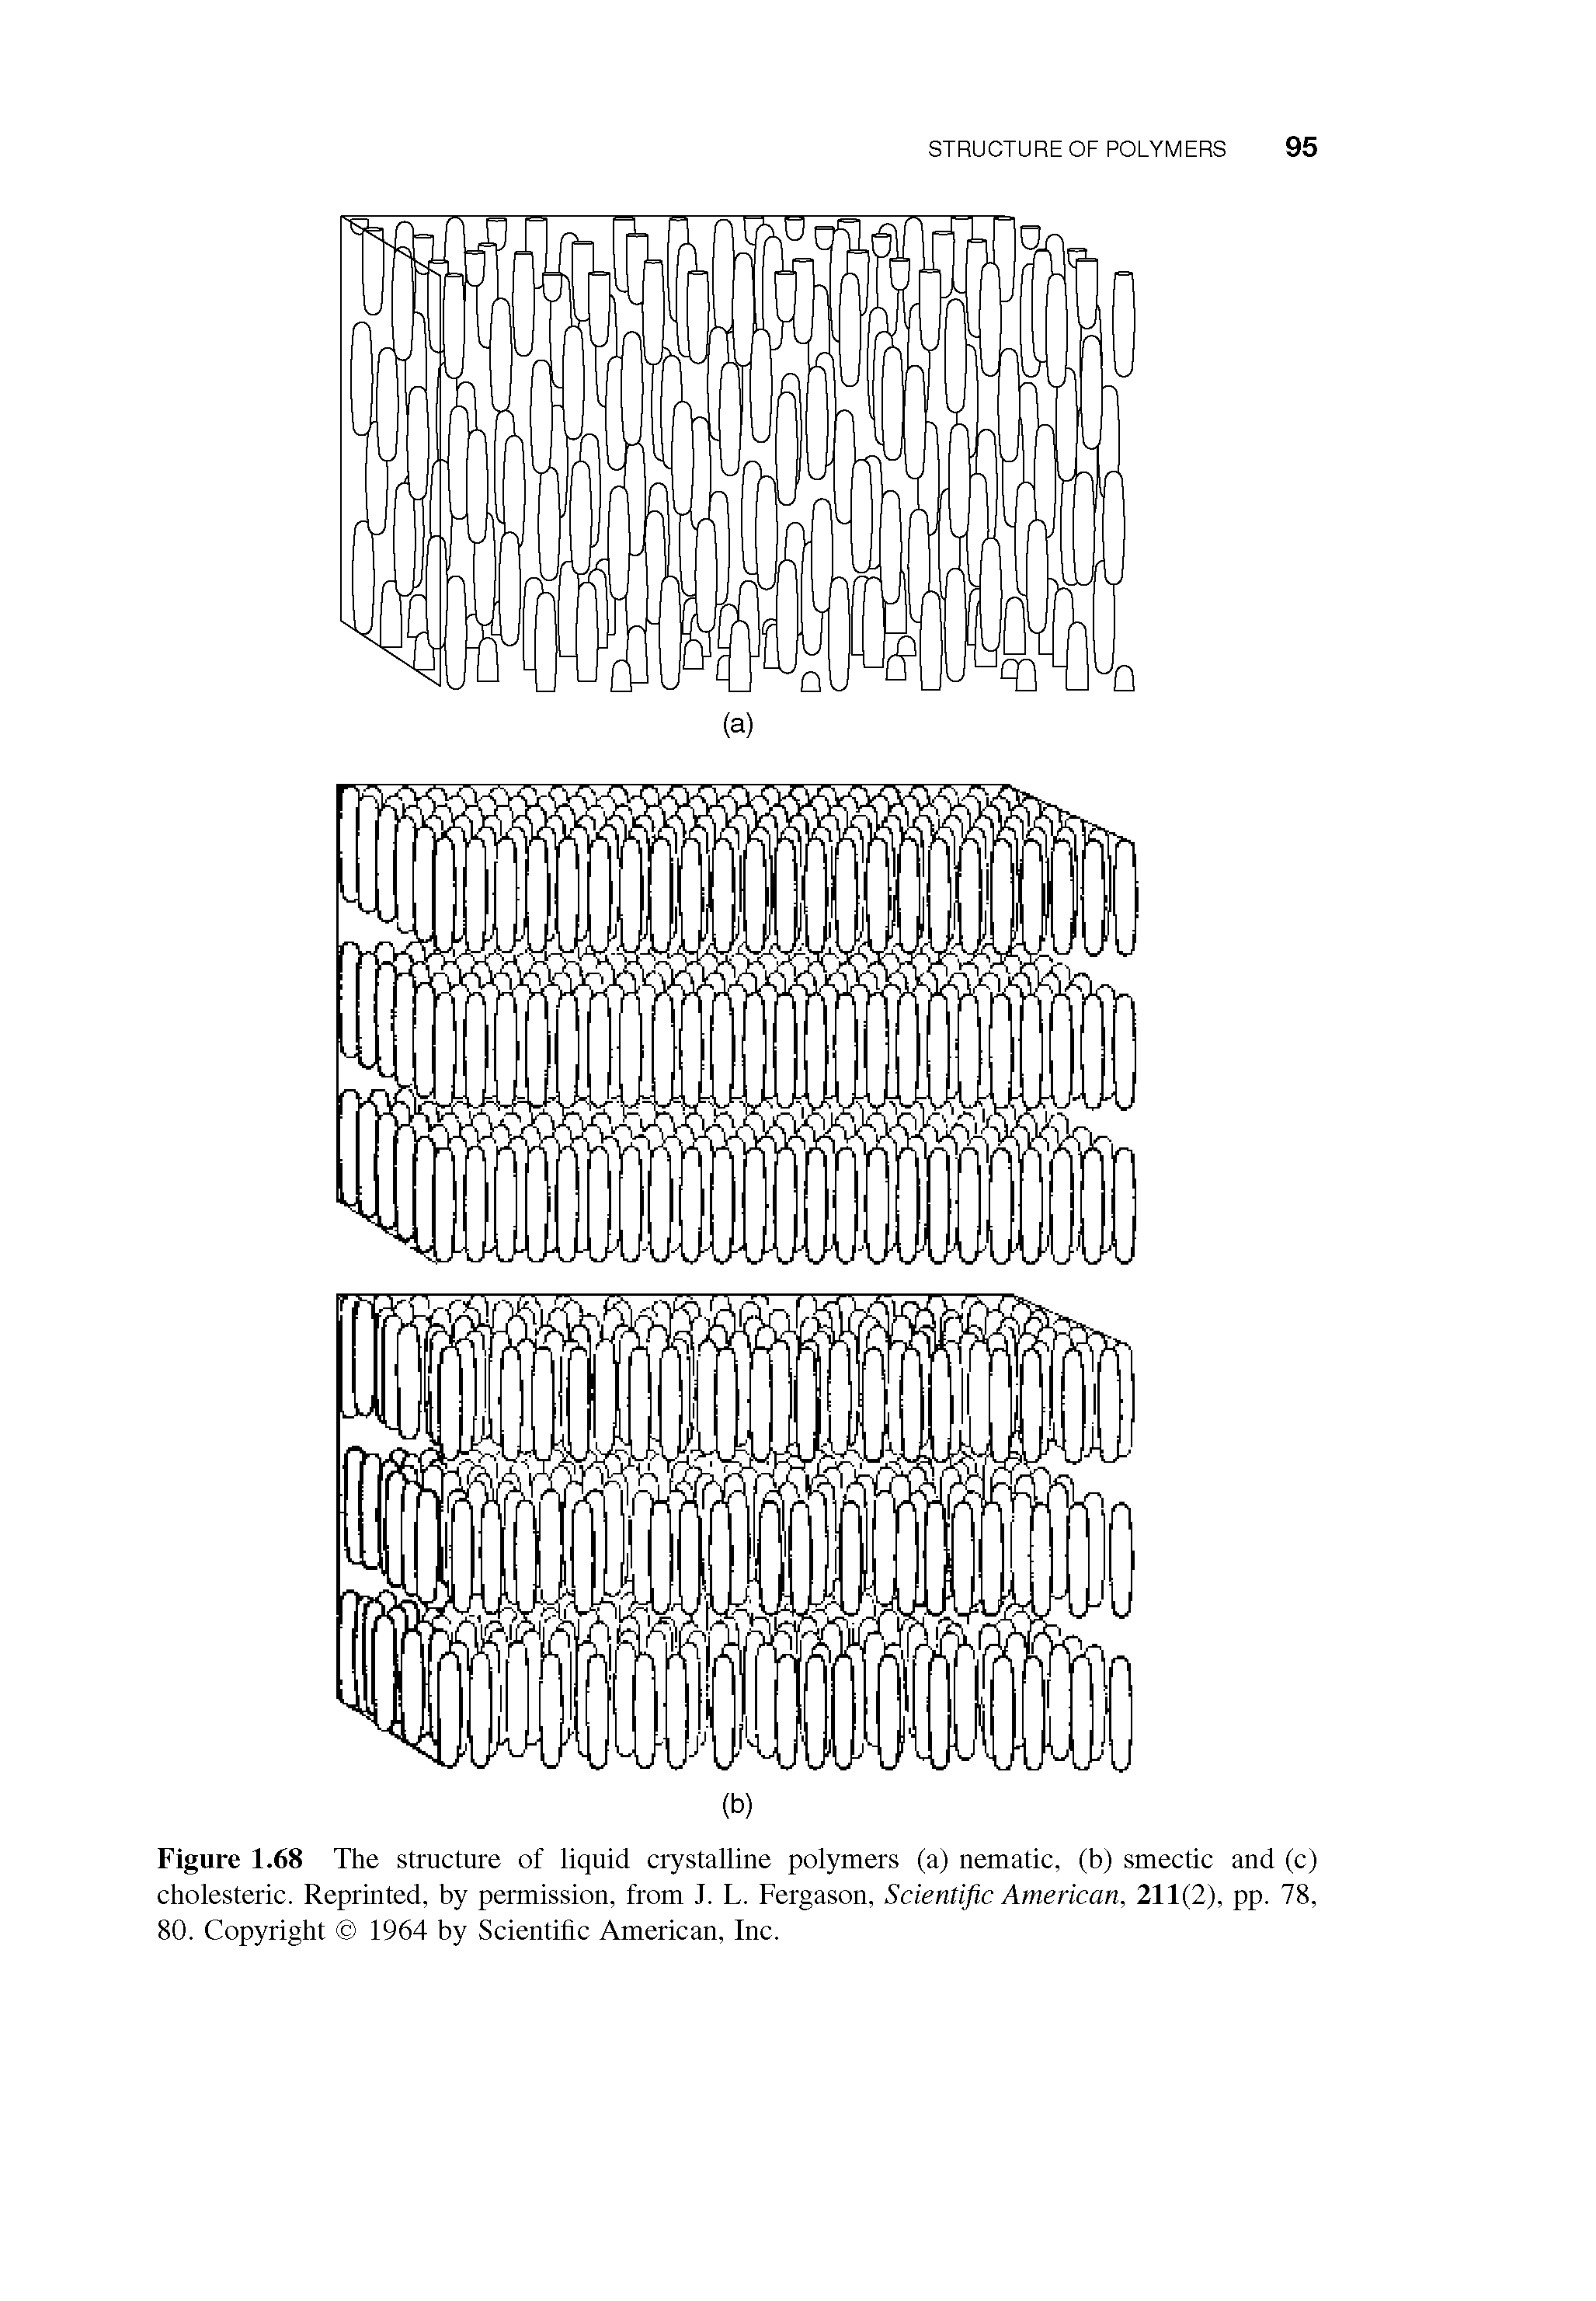 Figure 1.68 The structure of liquid crystalline polymers (a) nematic, (b) smectic and (c) cholesteric. Reprinted, by permission, from J. L. Fergason, Scientific American, 211(2), pp. 78, 80. Copyright 1964 by Scientific American, Inc.